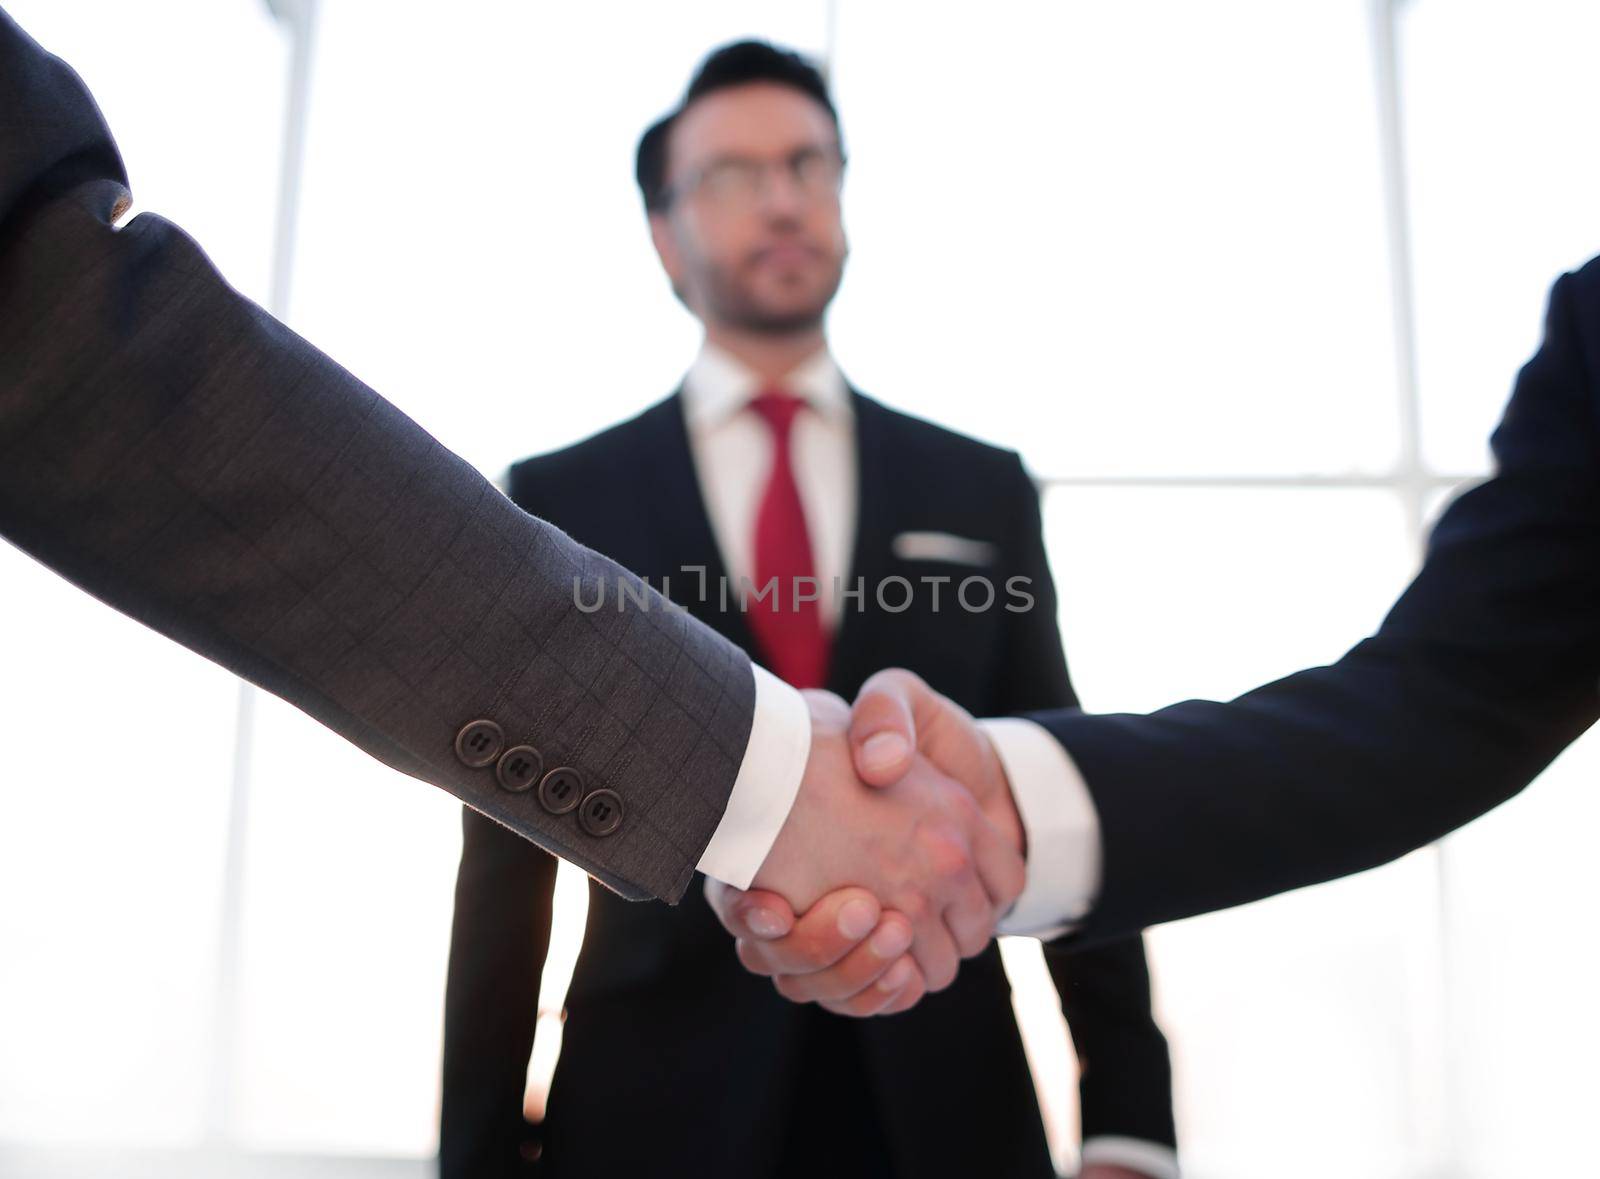 in the foreground is the handshake of business people by asdf